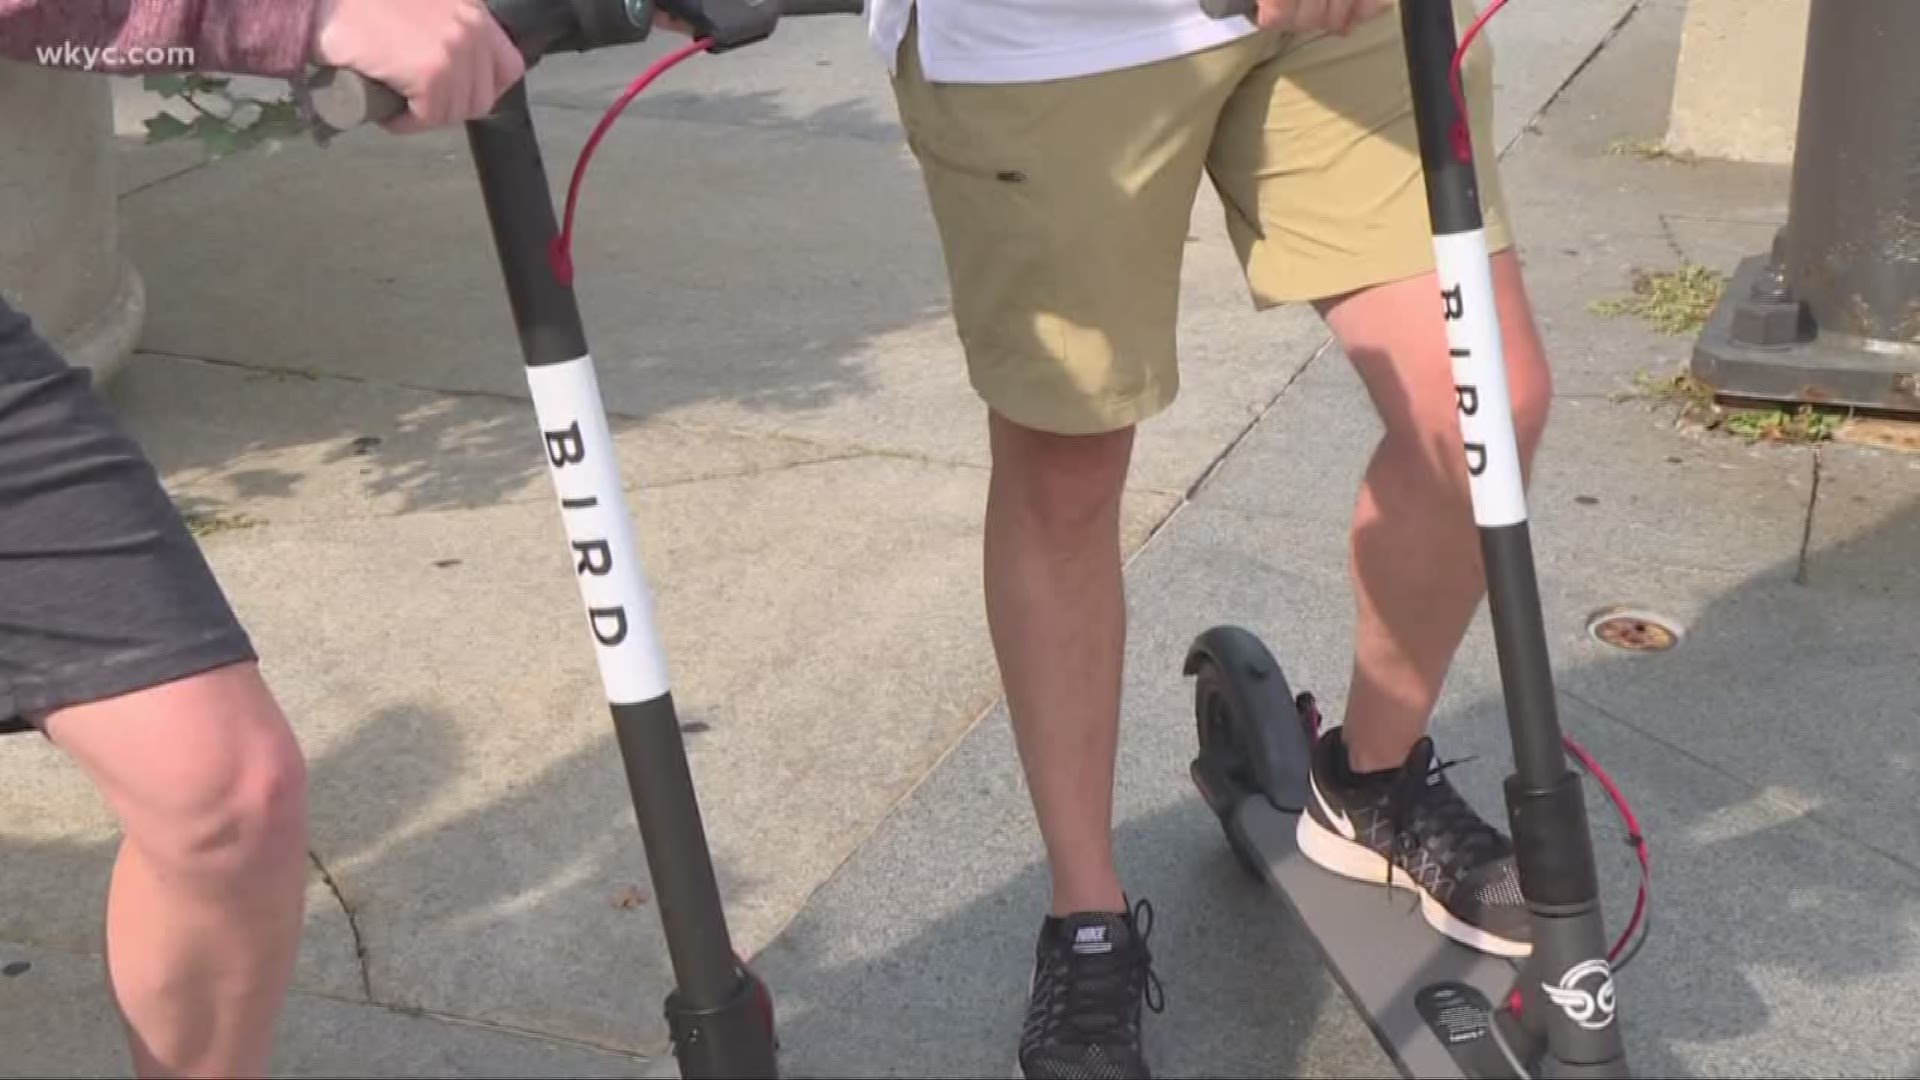 Bird electric scooter are out of CLE until further notice